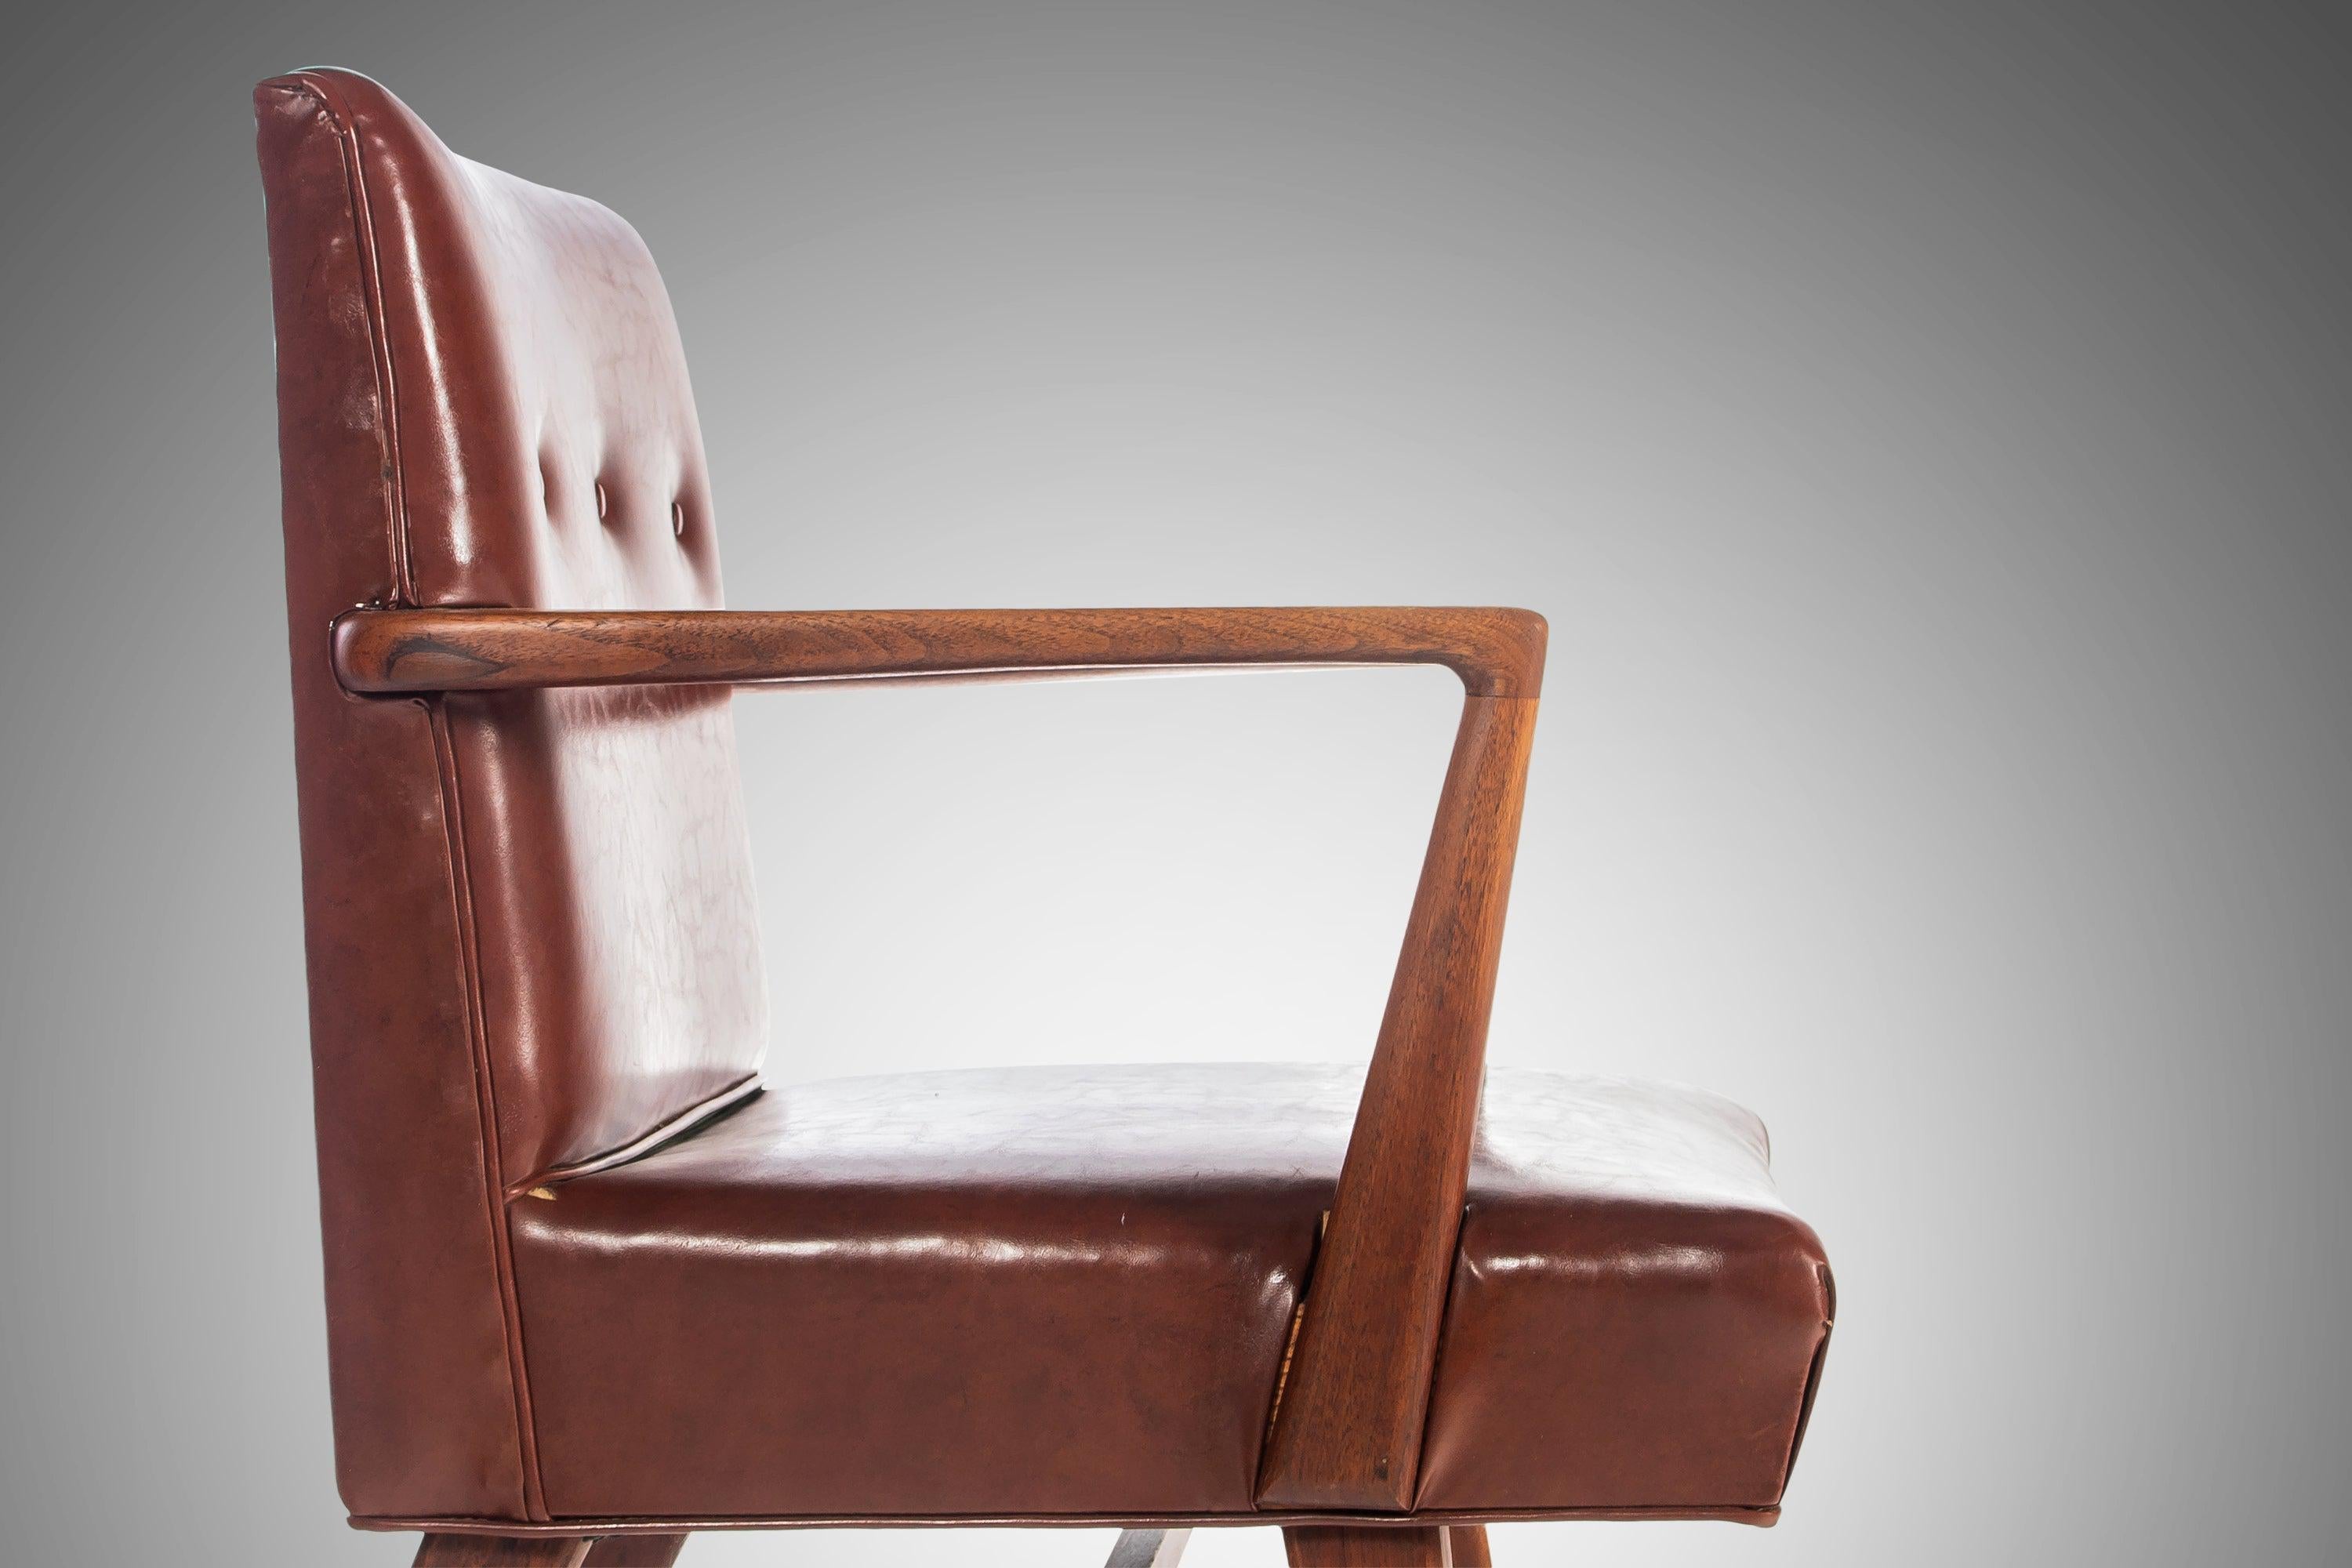 Early Jens Risom Model 108 Arm Chair for Risom Designs in Walnut, USA, c. 1950s For Sale 4